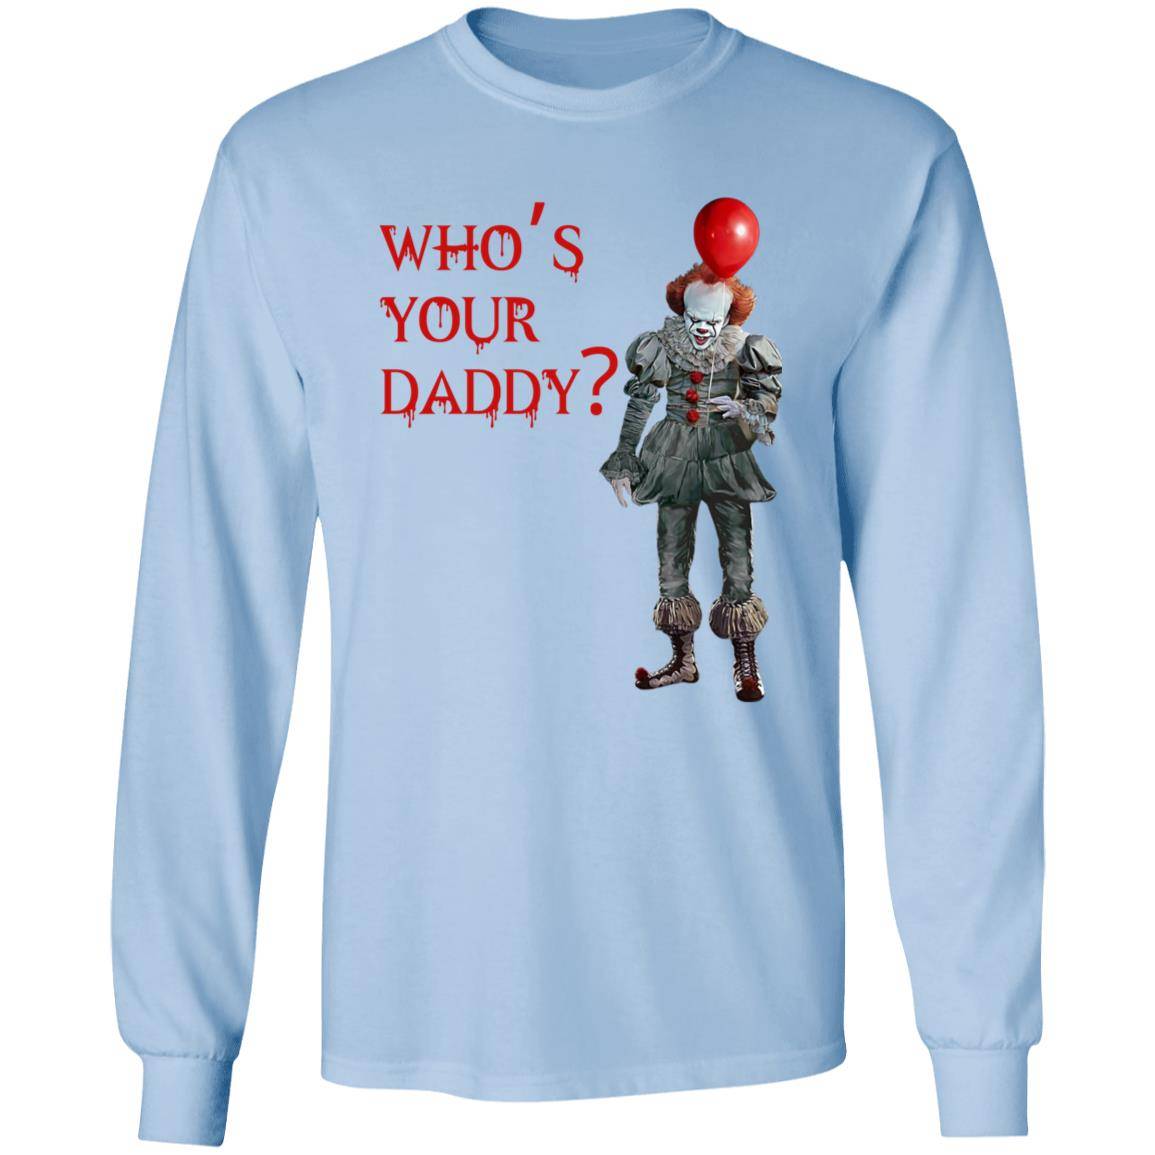 Light blue unisex Halloween long sleeve t-shirt with an image of a sinister clown standing with a red balloon. The caption reads: Who's Your Daddy written in red, bloody letters. The clown is simulated to look like Pennywise the clown from the movie It.